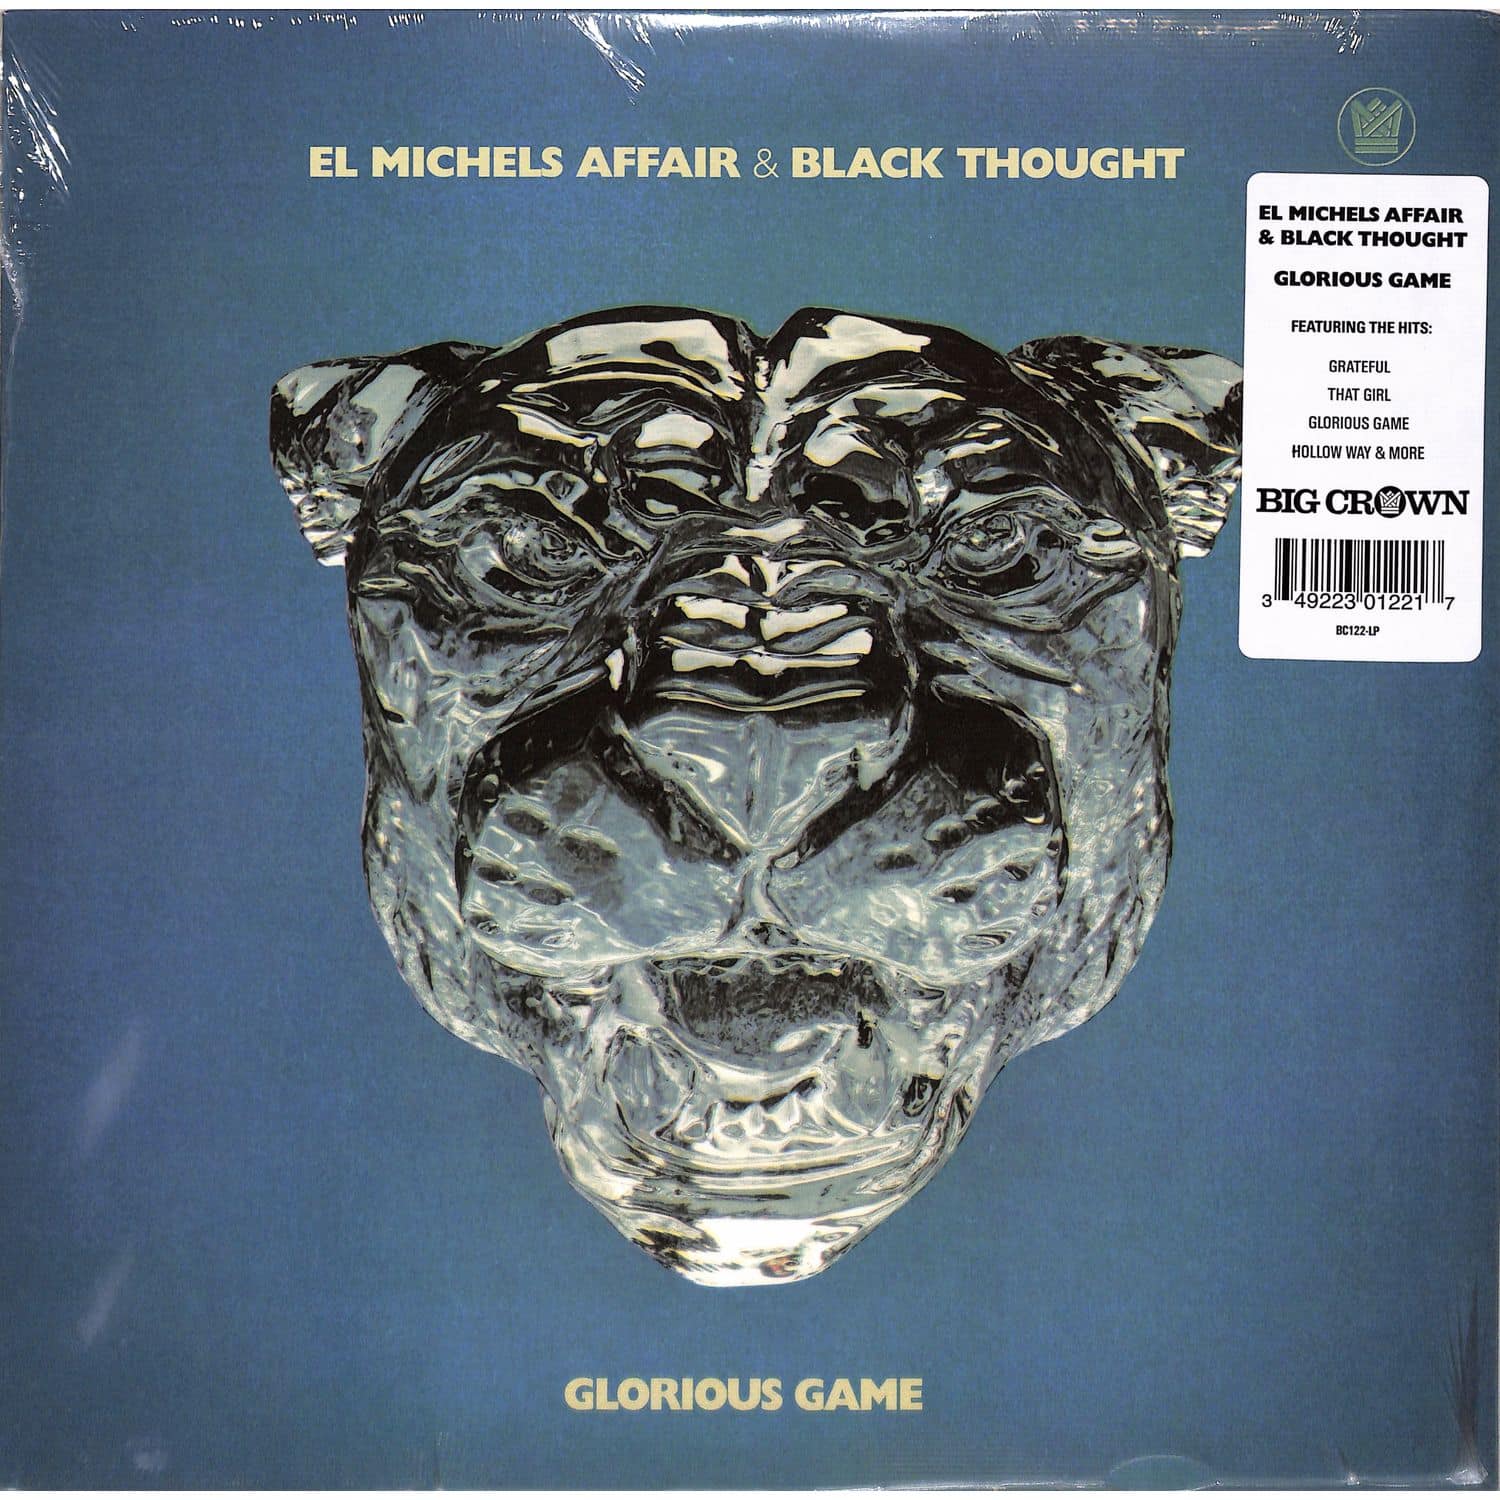 El Michels Affair & Black Thought - GLORIOUS GAME 